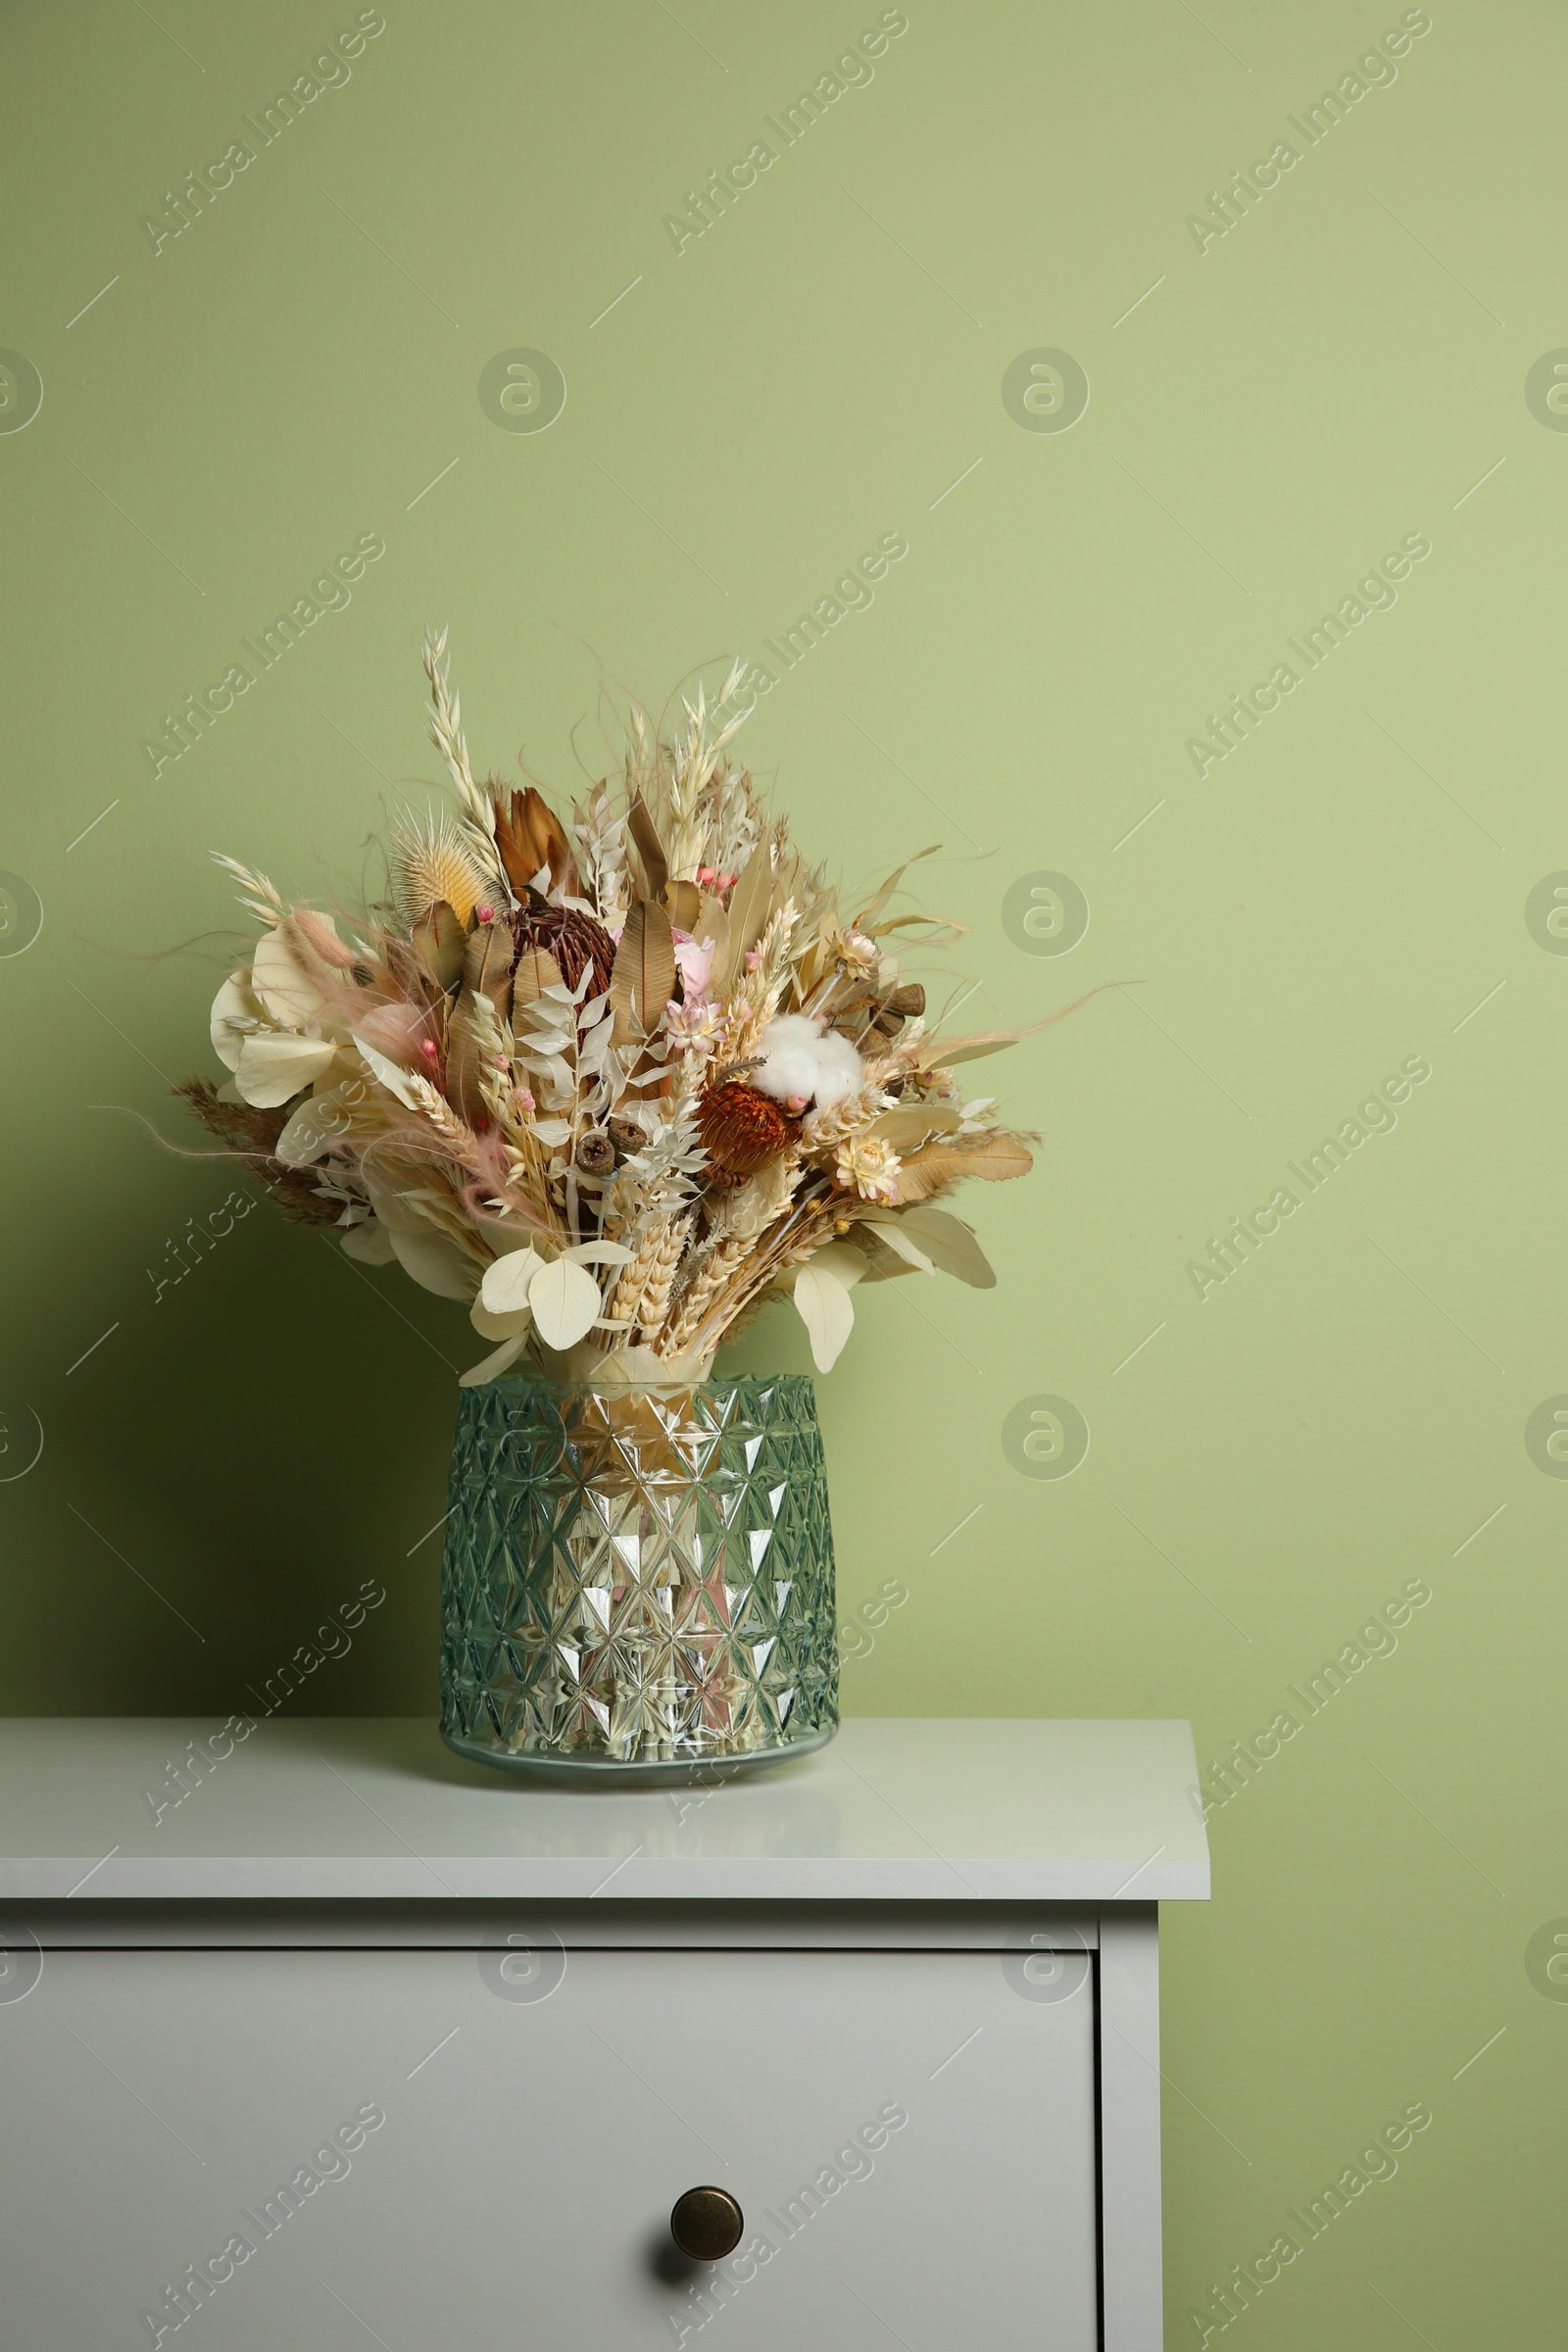 Photo of Beautiful dried flower bouquet in glass vase on white chest of drawers near olive wall